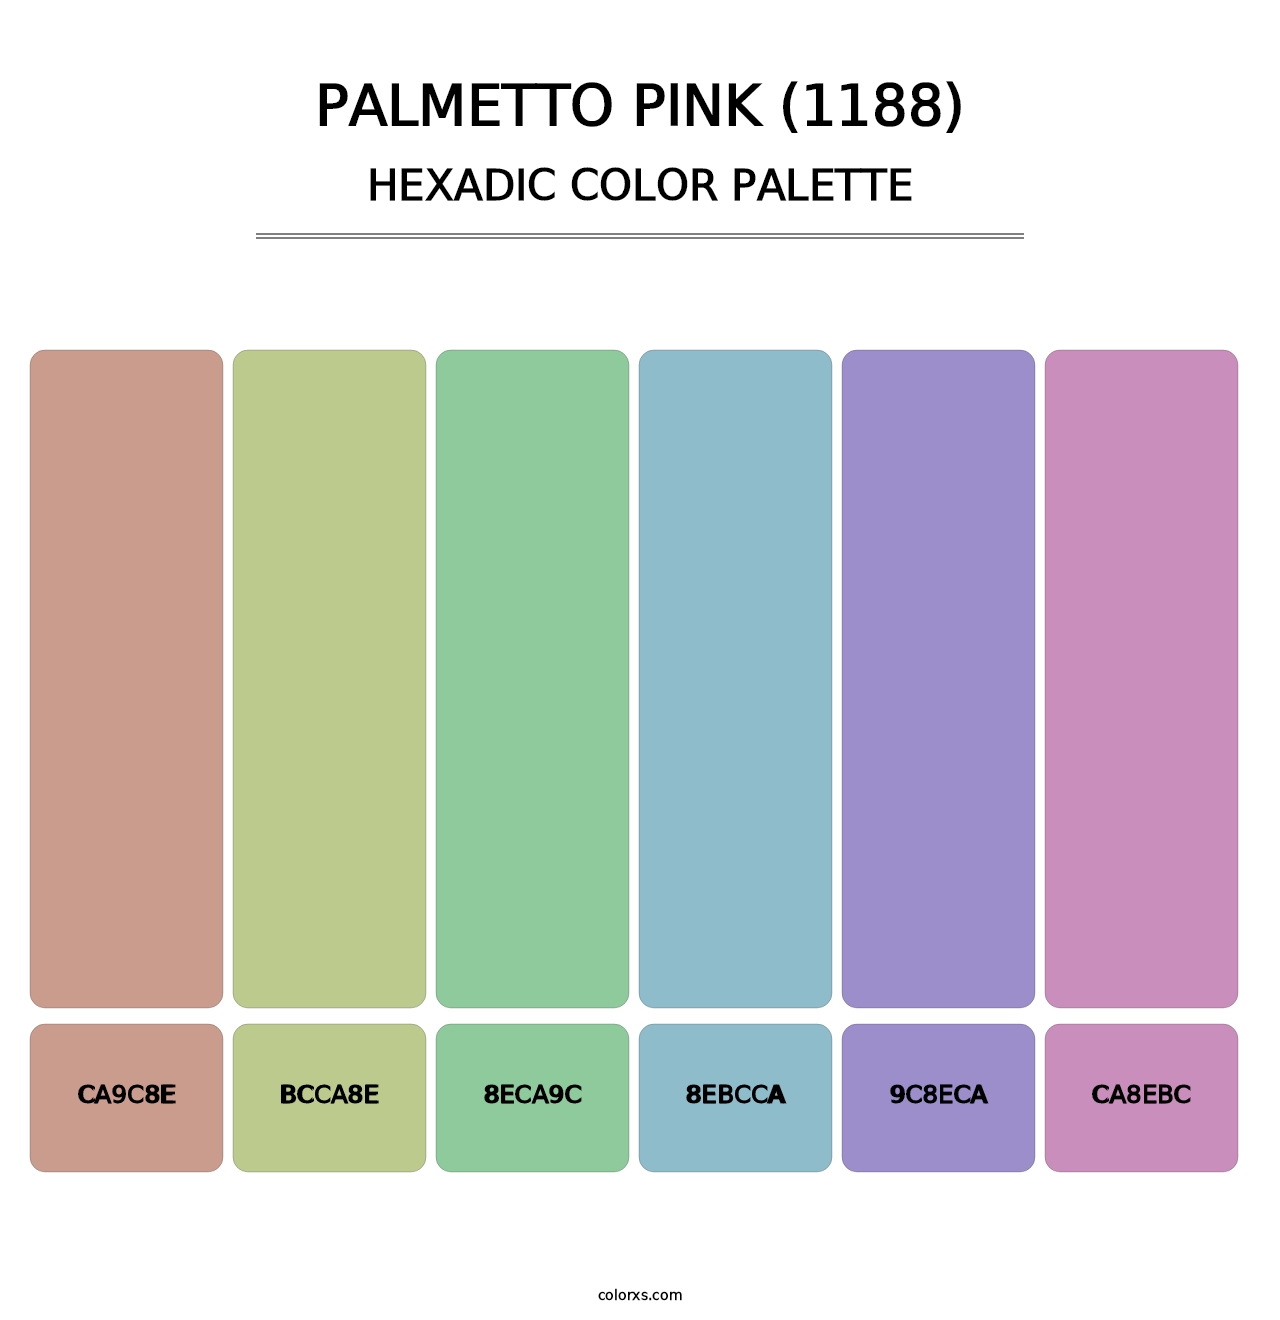 Palmetto Pink (1188) - Hexadic Color Palette